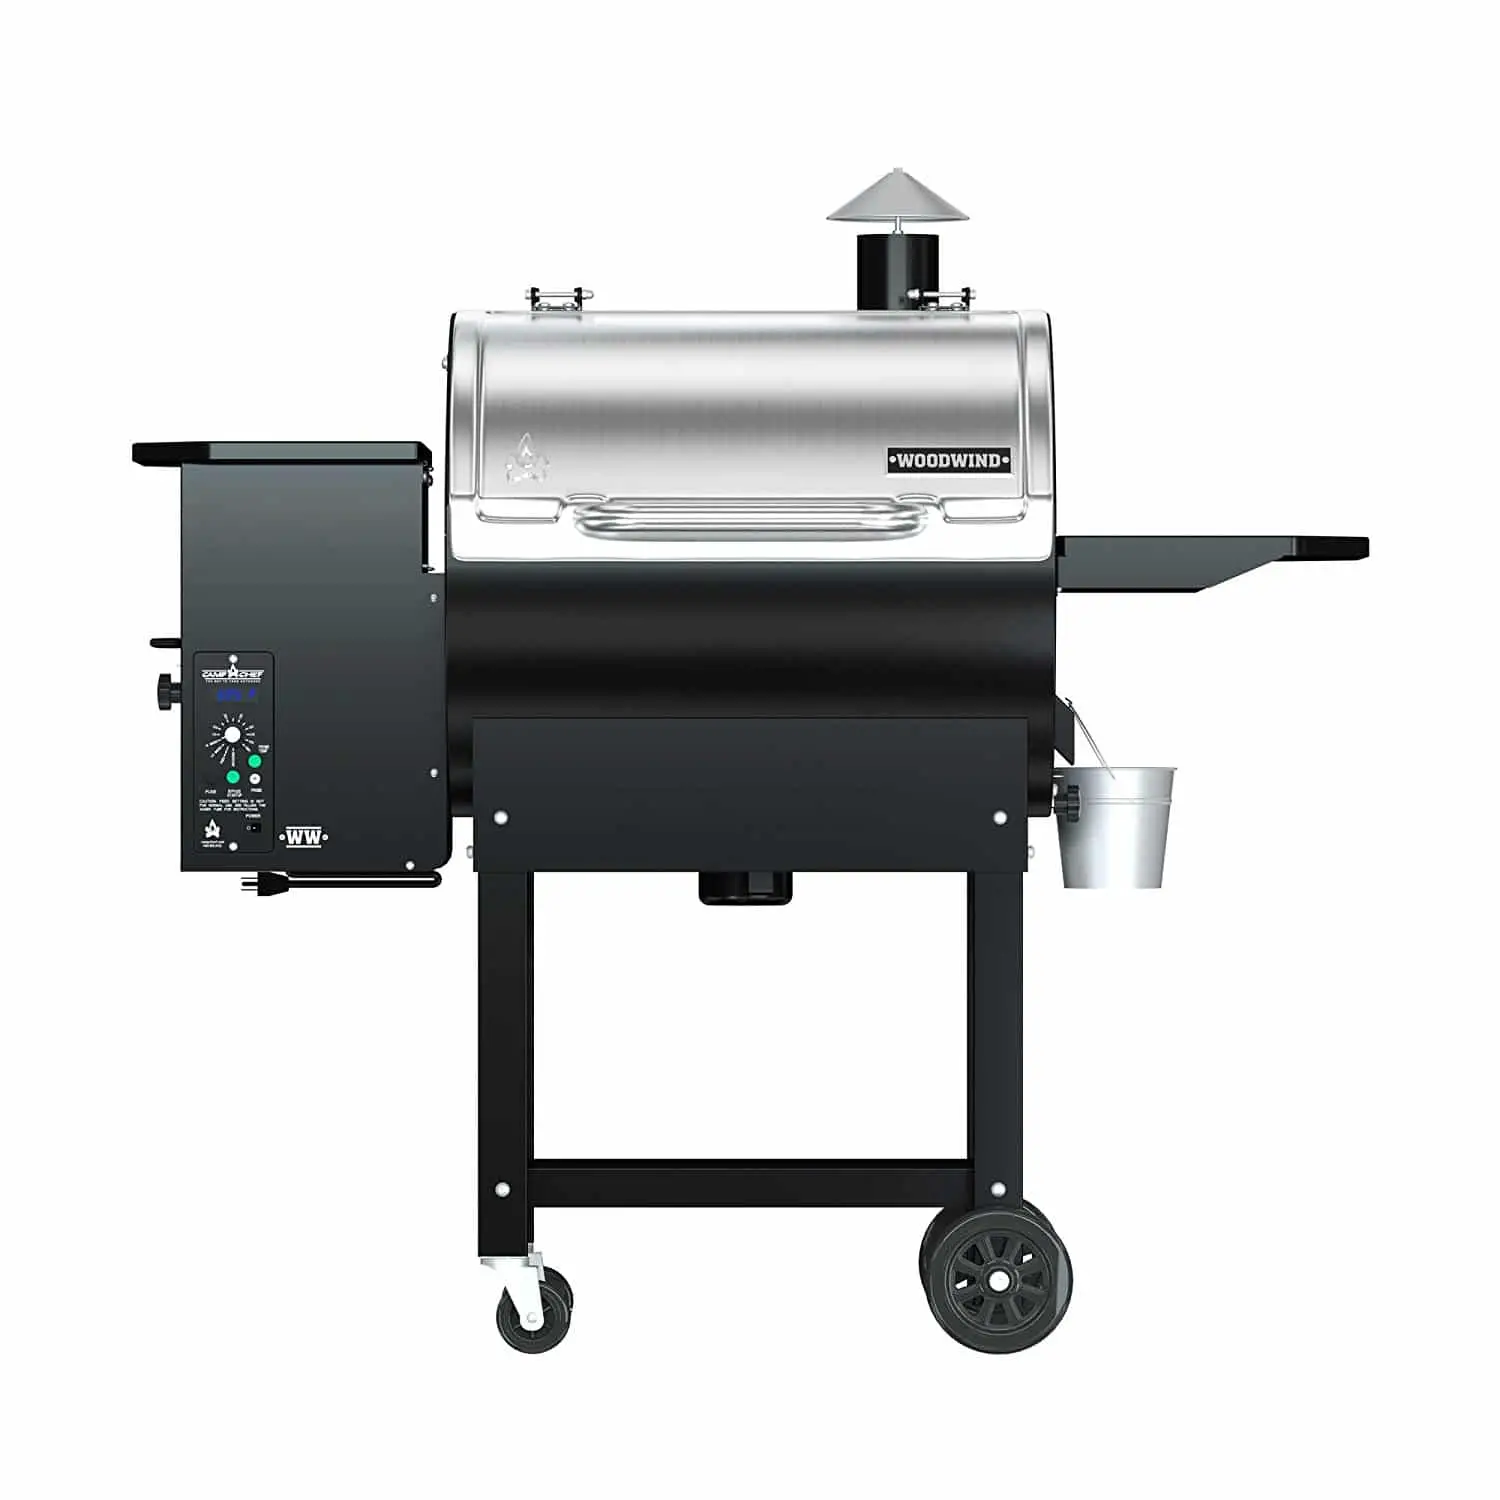 Camp Chef Woodwind Pellet Grill Review And Rating